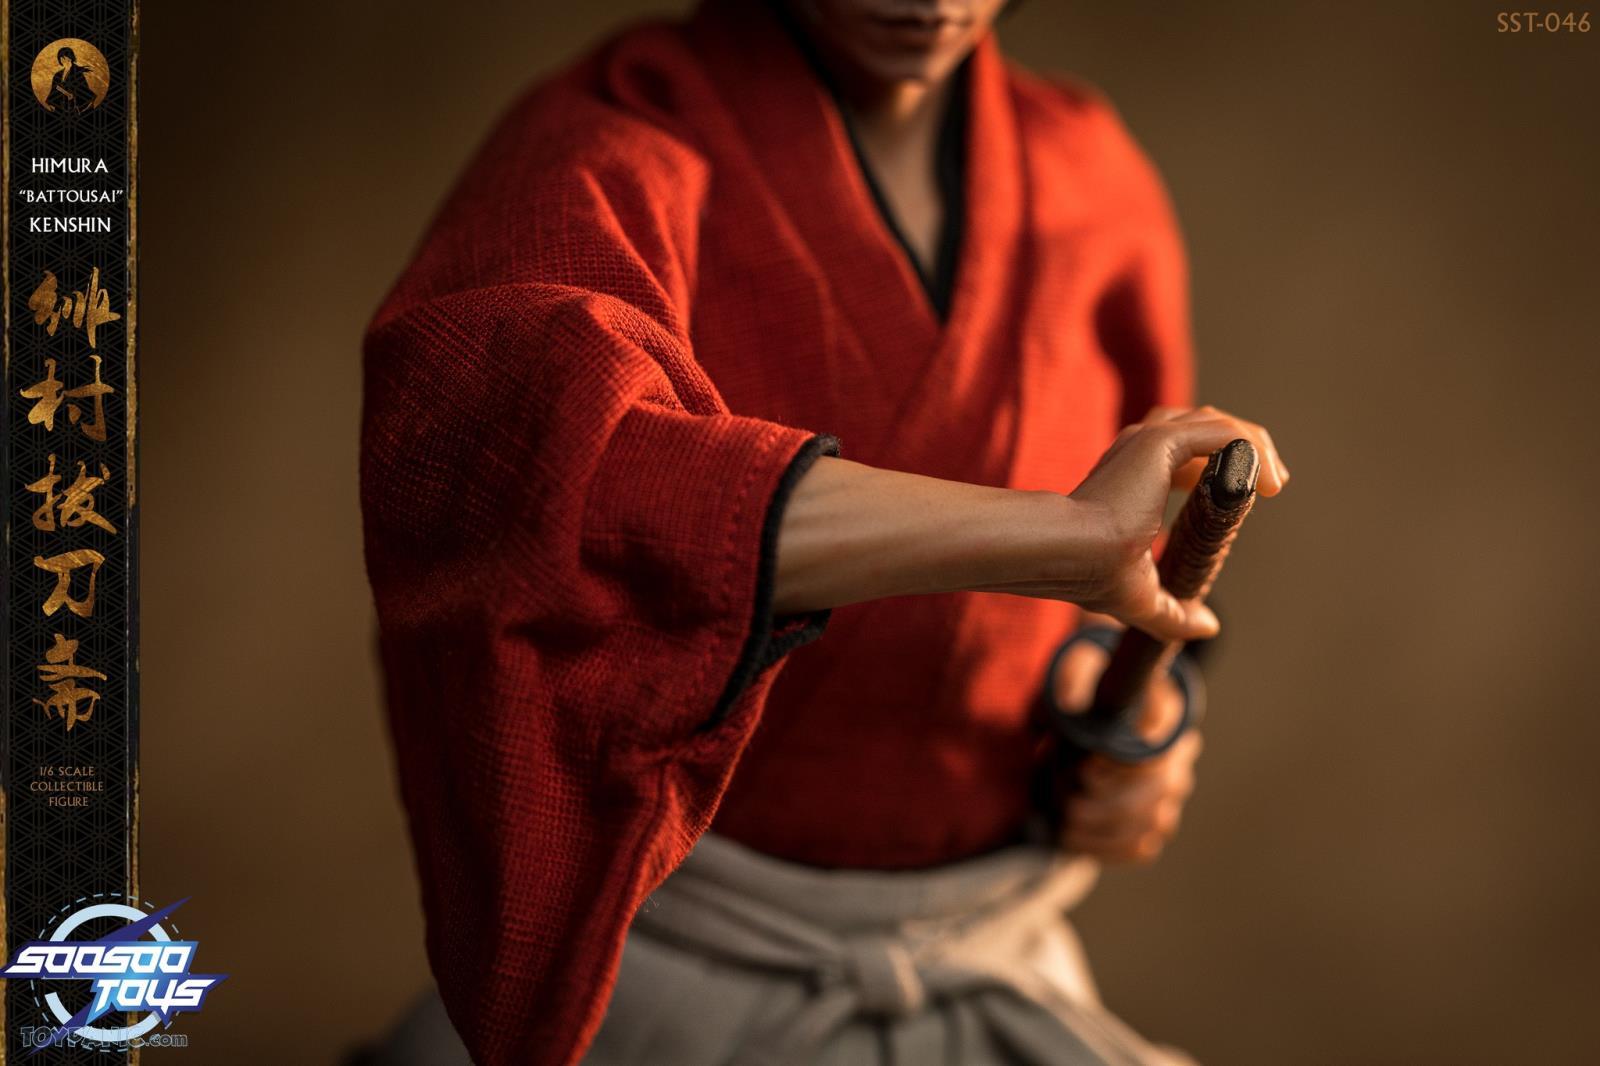 himura - NEW PRODUCT: 1/6 scale Rurouni Kenshin Collectible Figure from SooSooToys 712202251230PM_4333714